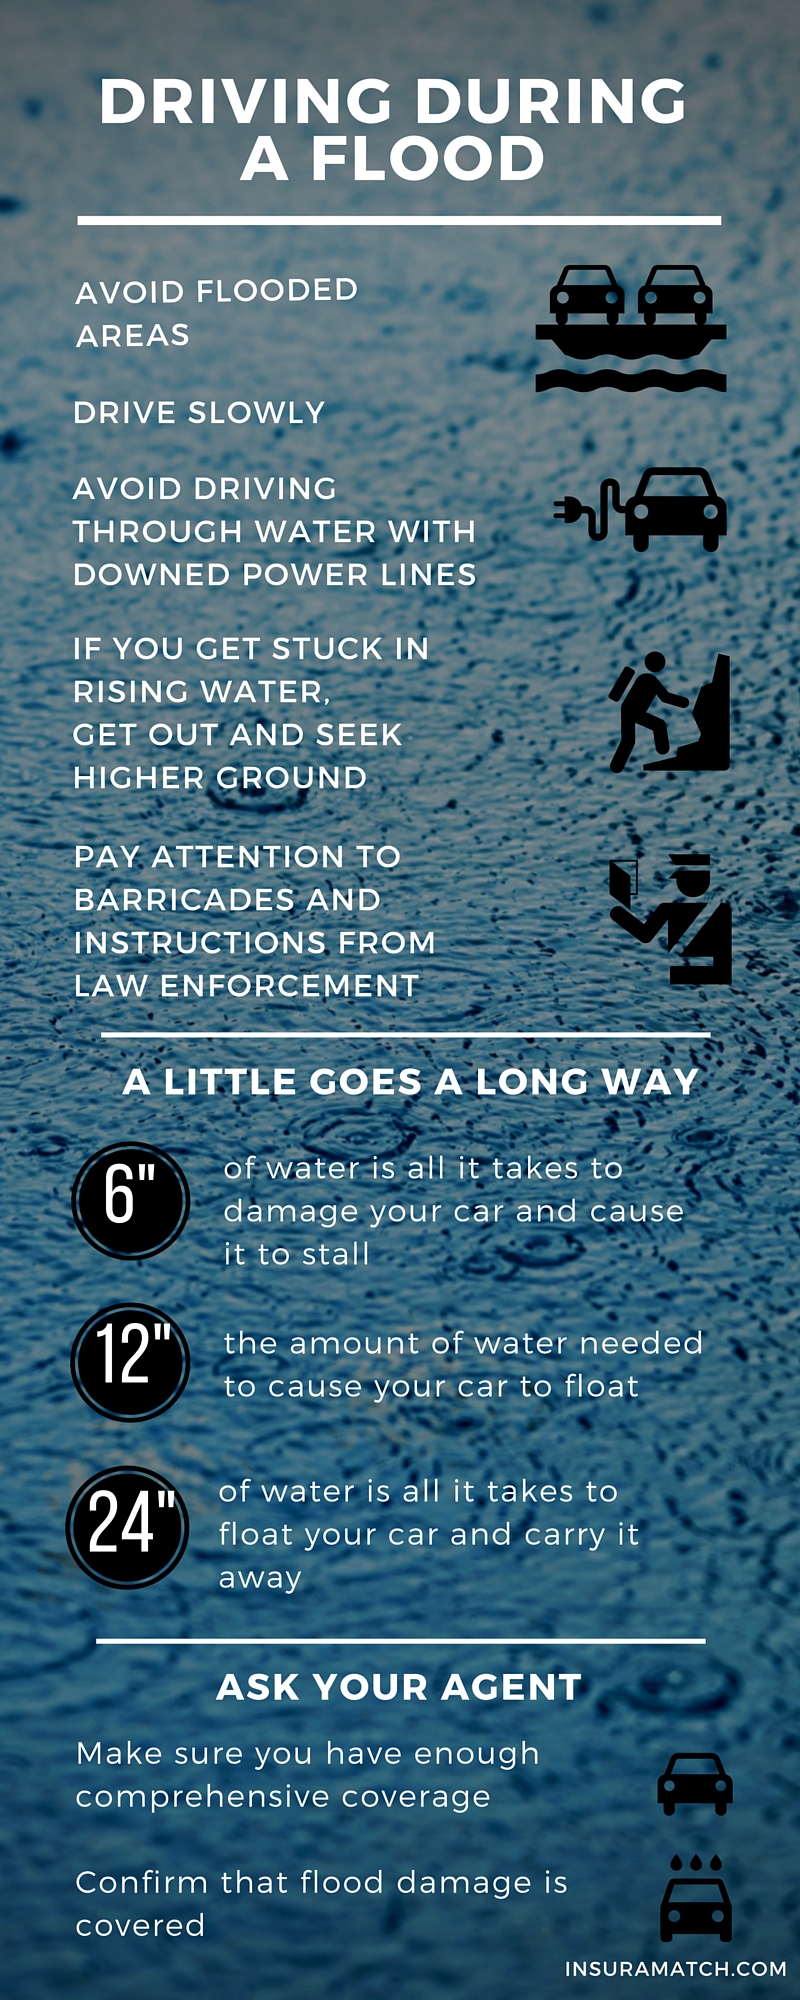 Driving during a flood is extremely dangerous - it's best to stay off the roads. However, if you are unable to avoid roads with water, here are some tips for driving during a flood.